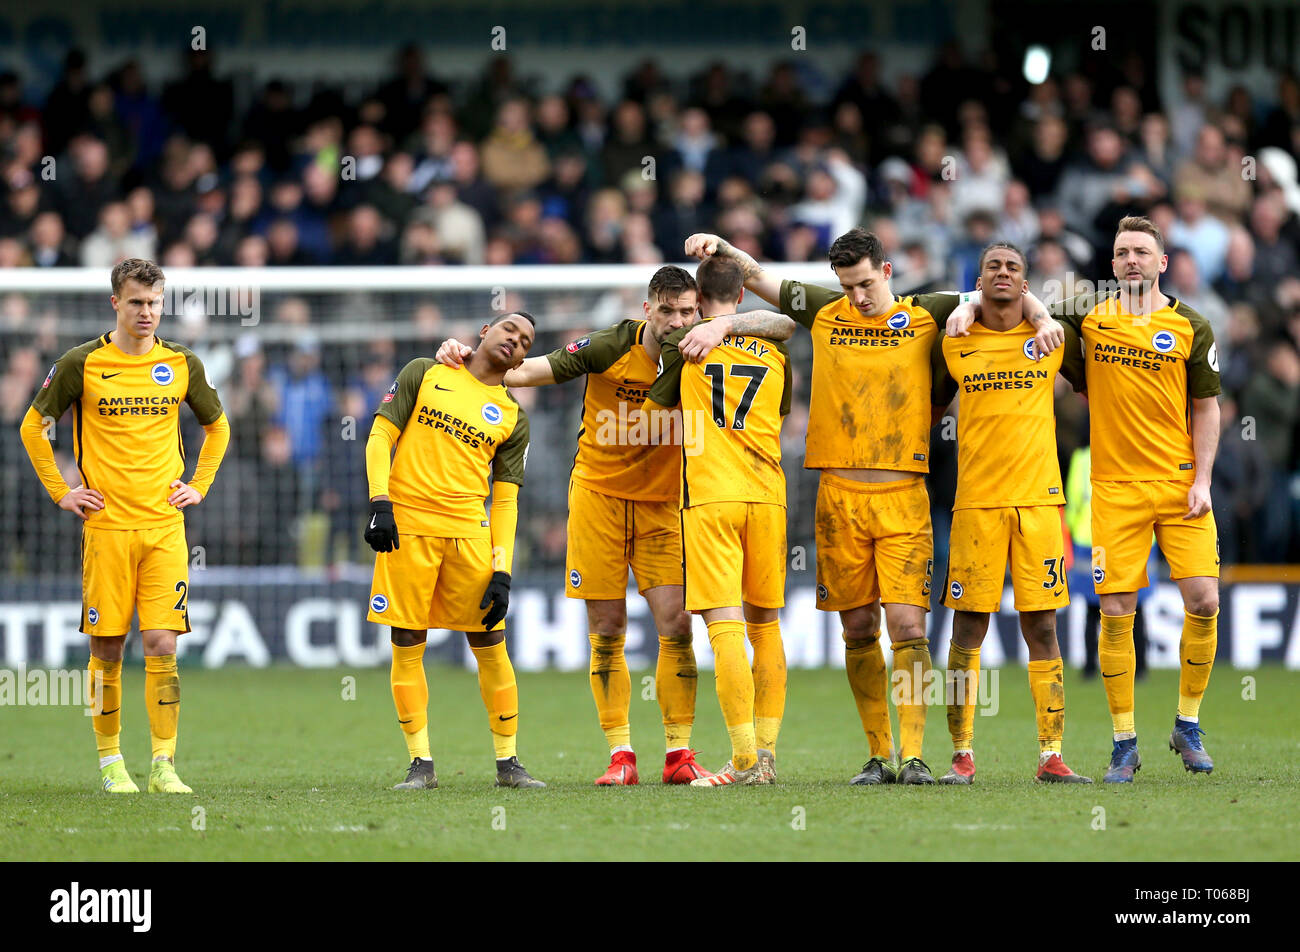 Brighton and Hove Albion players react watching the penalty shoot out during the FA Cup quarter final match at The Den, London. Stock Photo